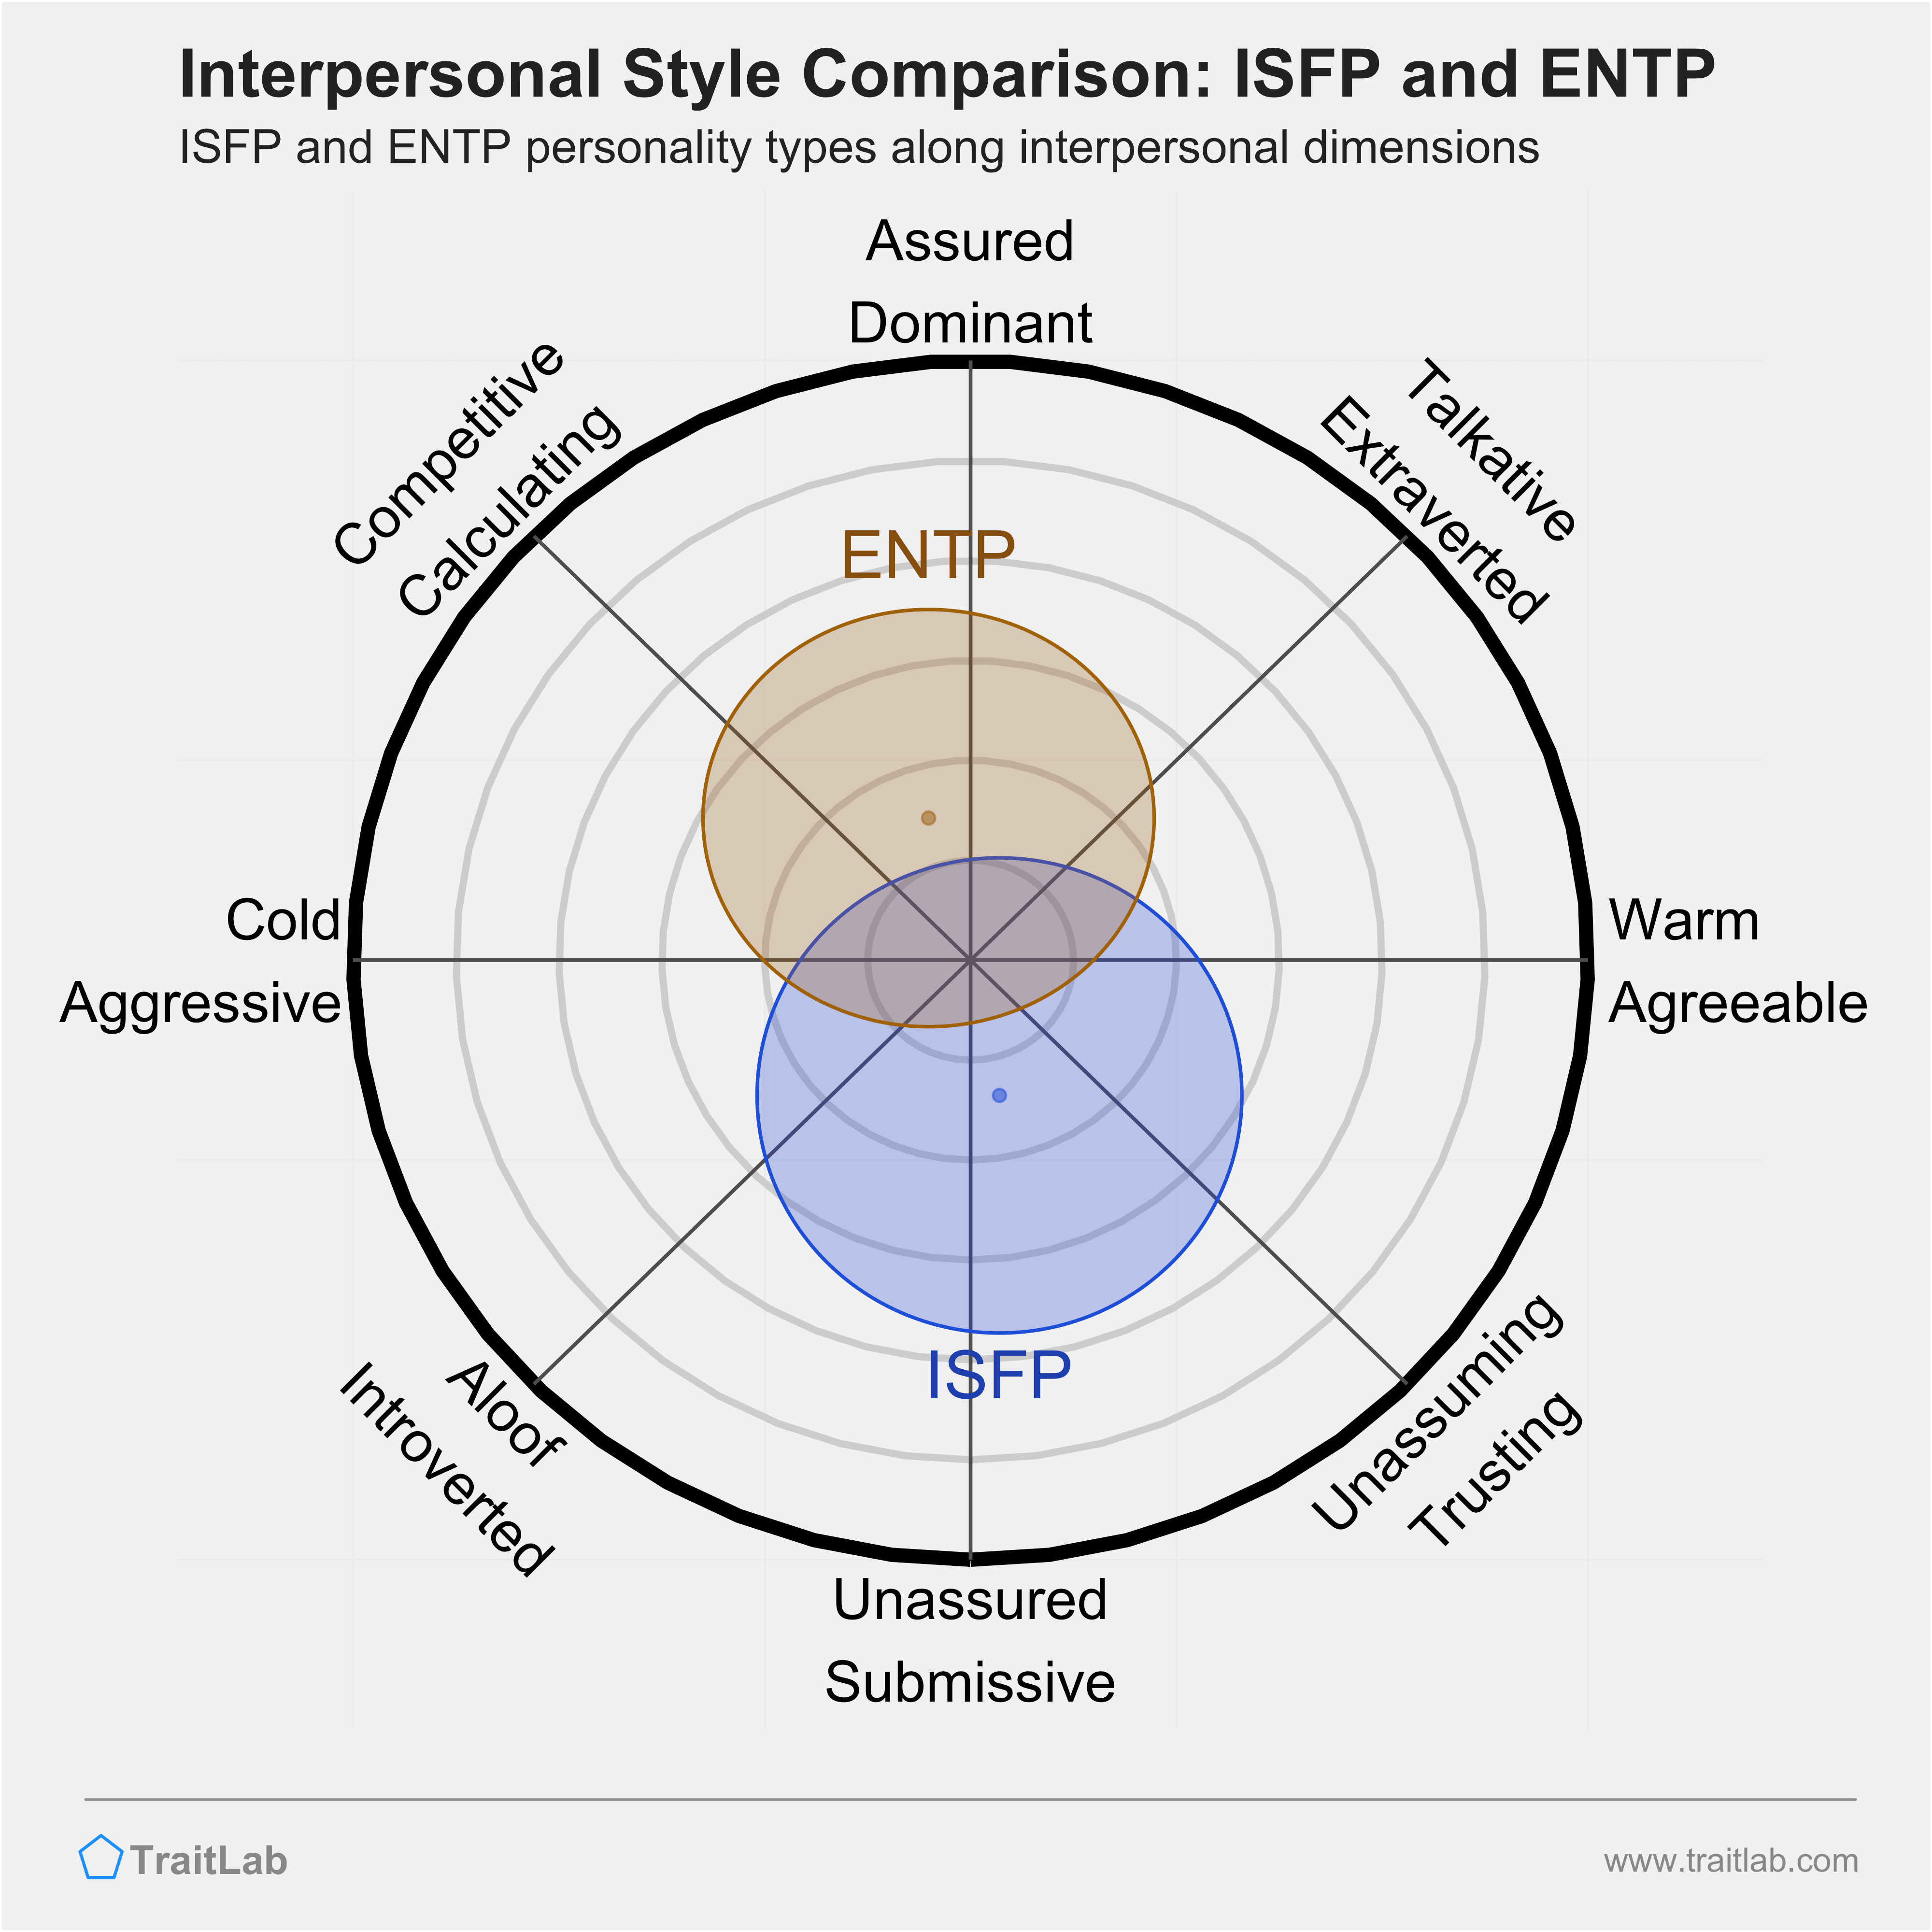 ISFP and ENTP comparison across interpersonal dimensions